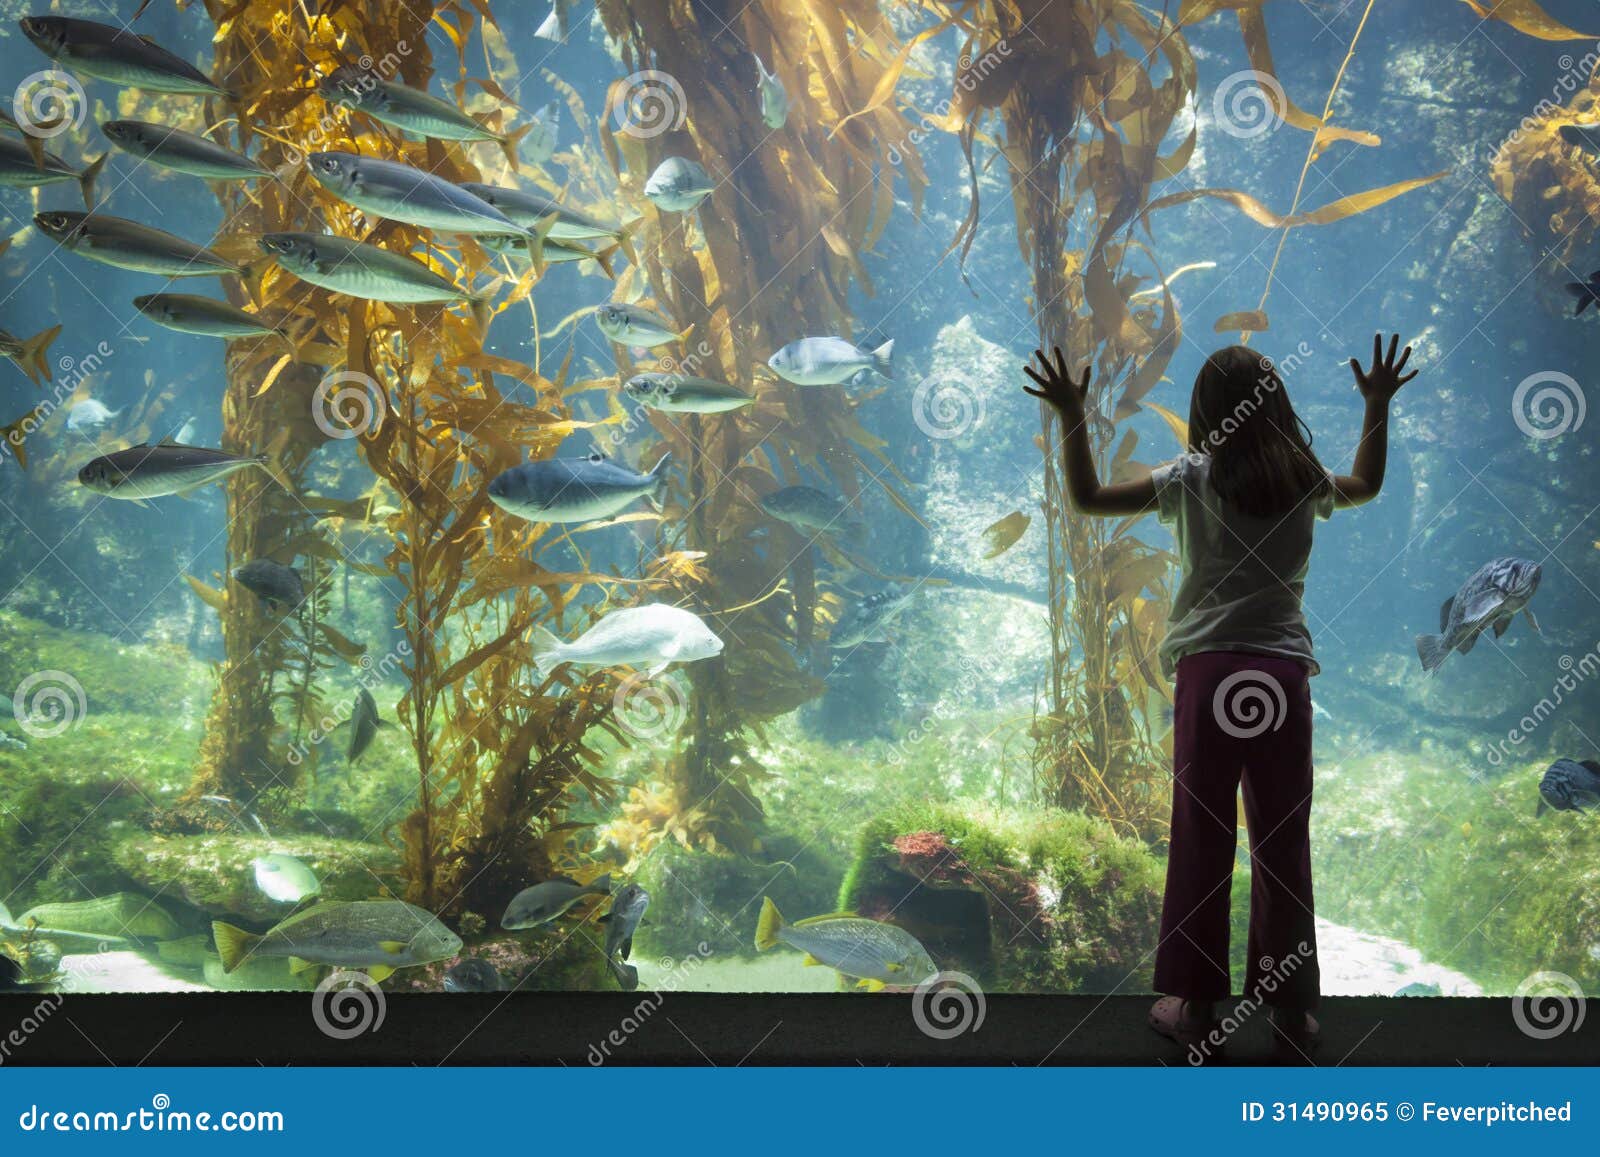 young girl standing up against large aquarium observation glass